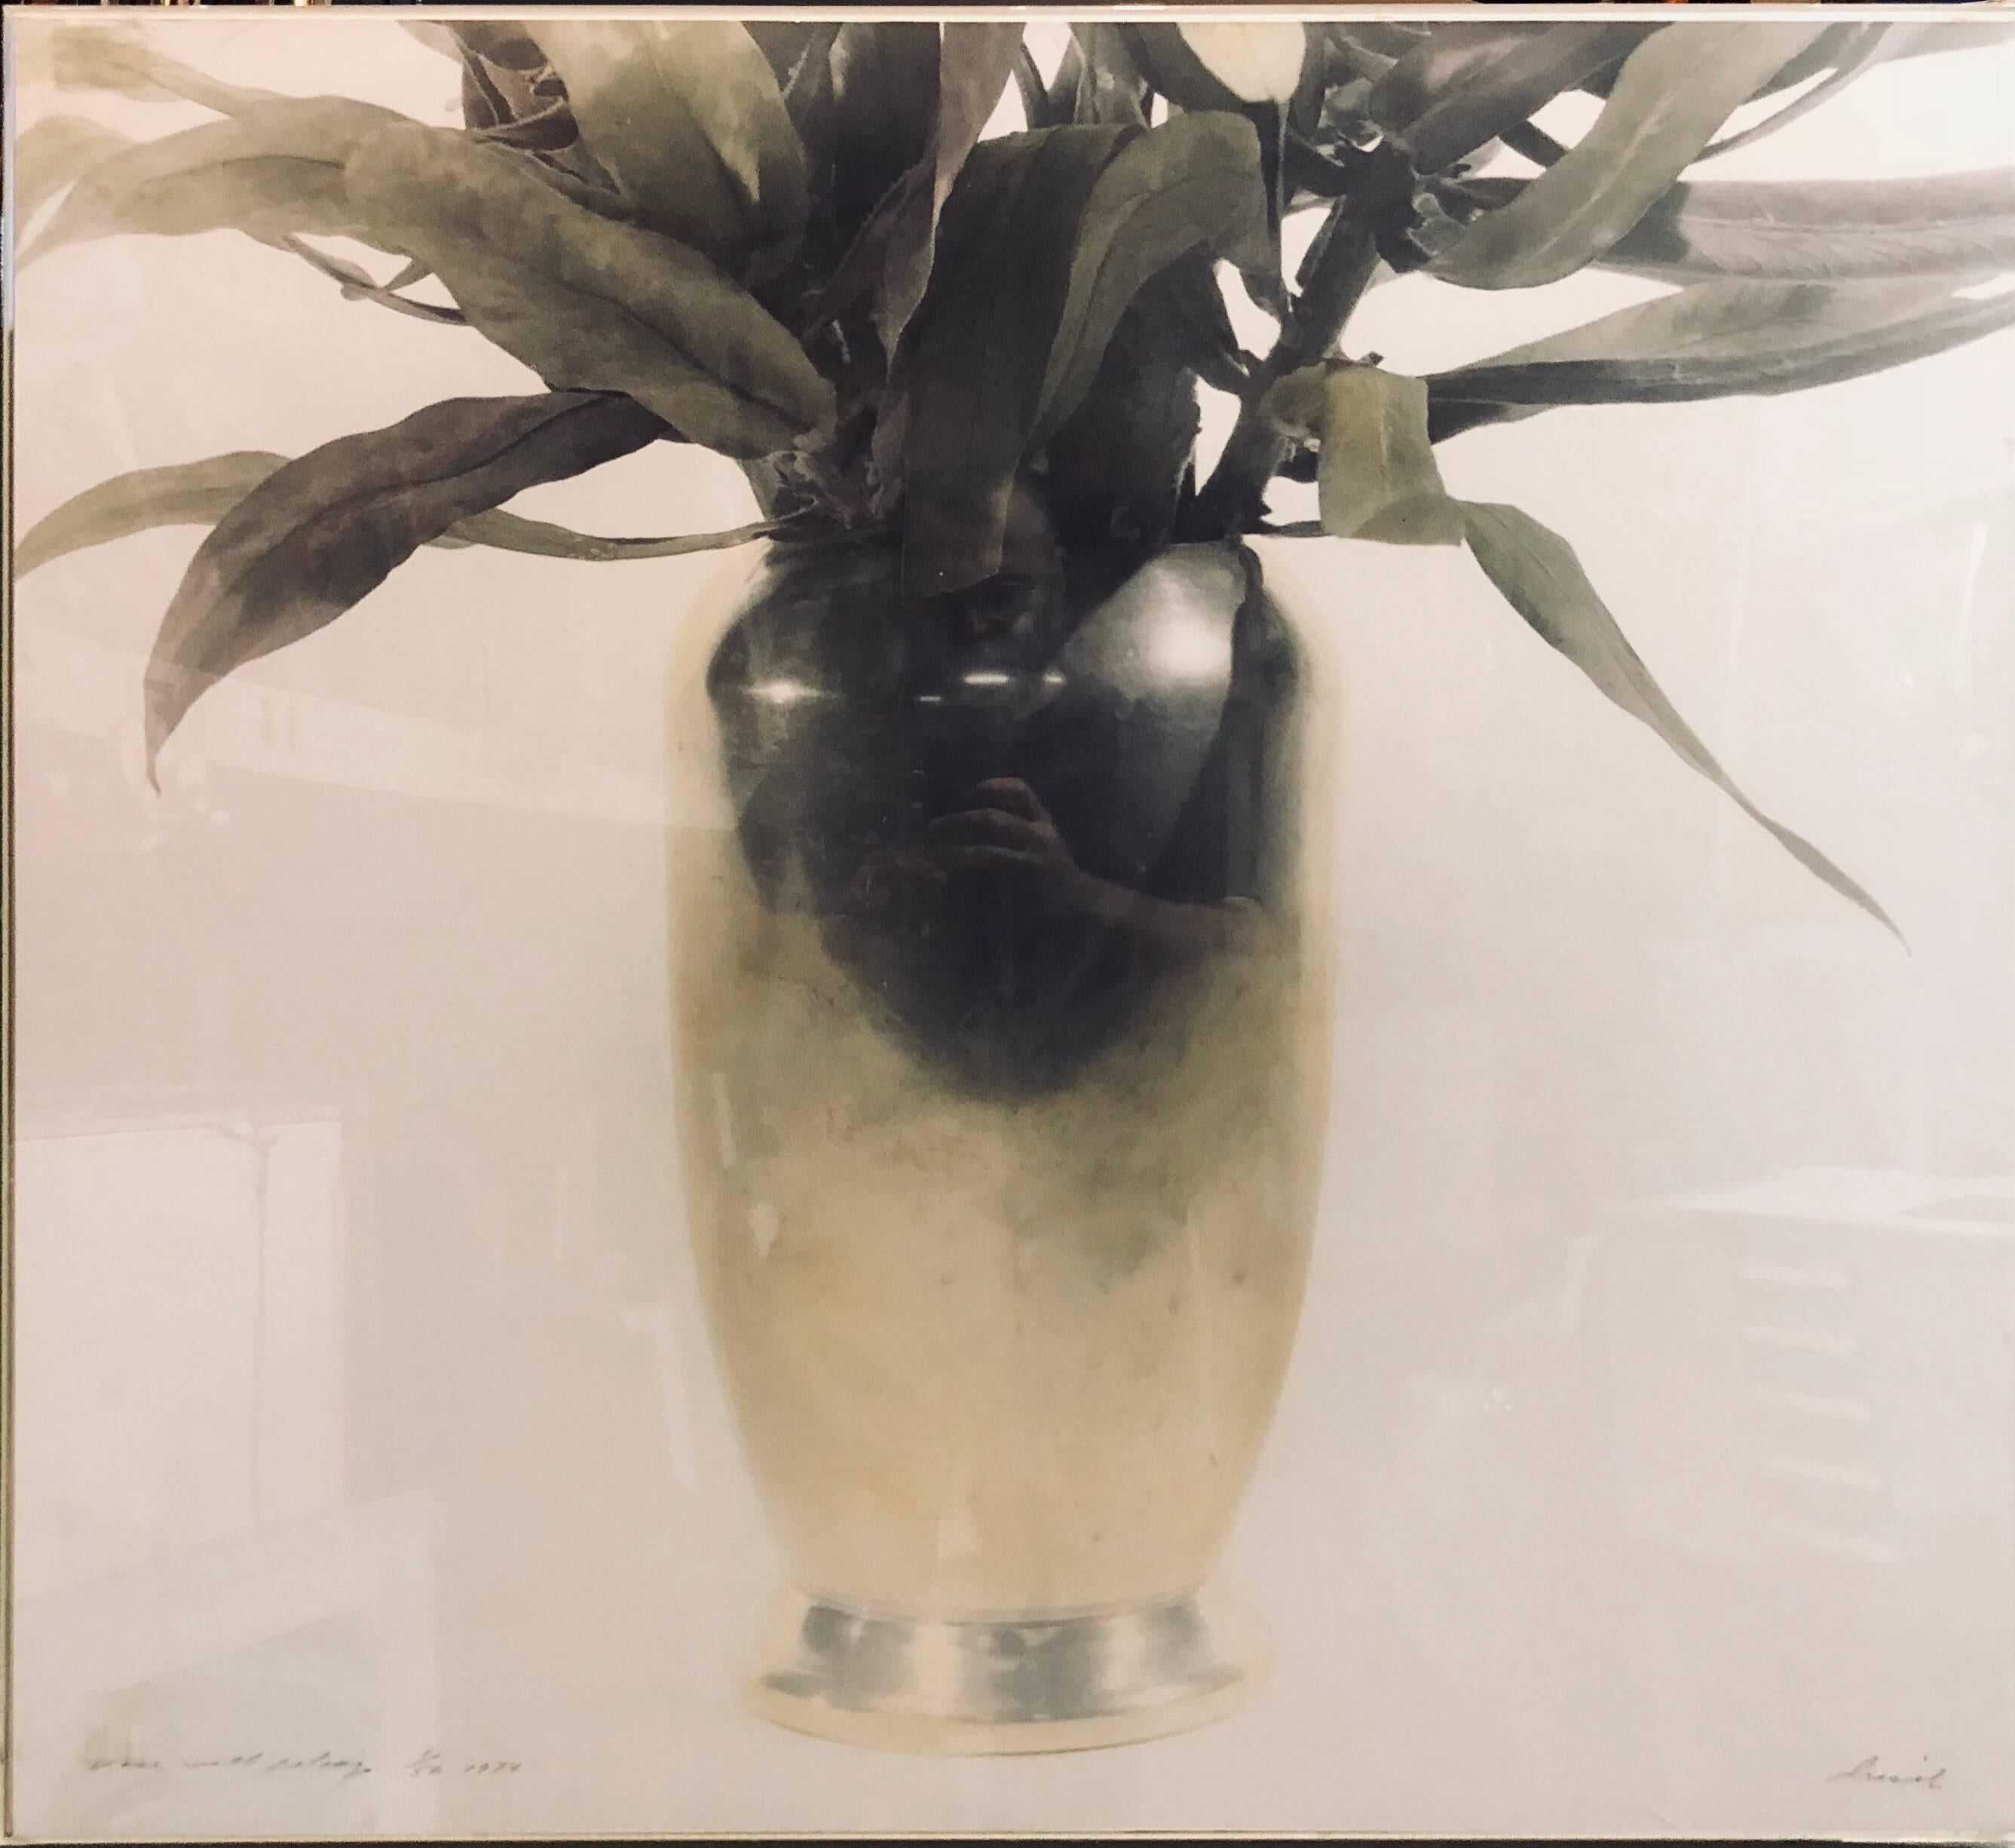 Russell Drisch Color Photograph - Vase with Foliage, Hand Tinted Photograph. Vintage Photo Print